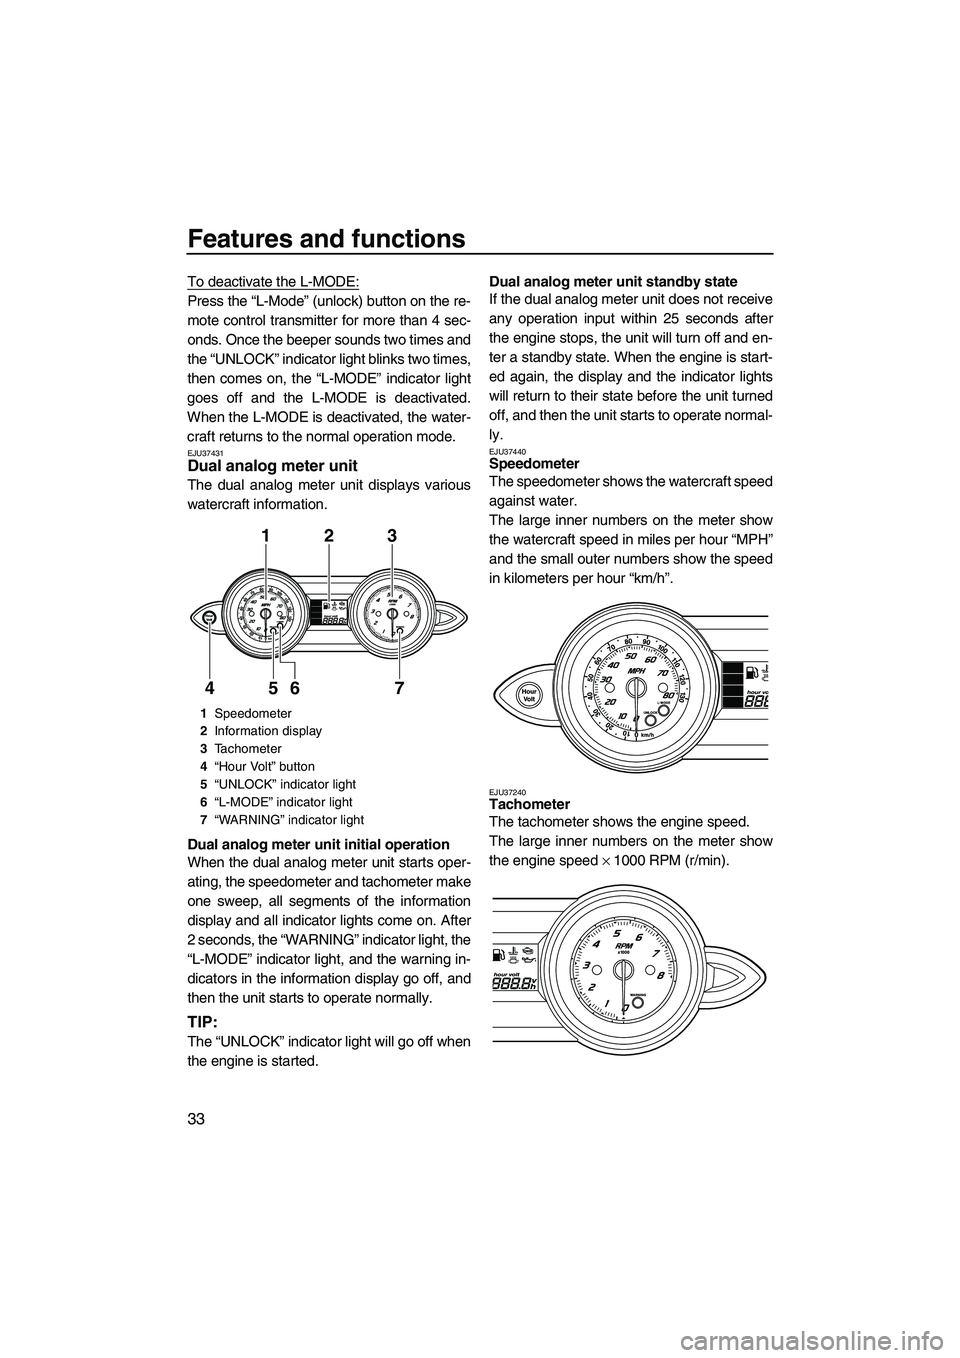 YAMAHA FZR SVHO 2009 Owners Guide Features and functions
33
To deactivate the L-MODE:
Press the “L-Mode” (unlock) button on the re-
mote control transmitter for more than 4 sec-
onds. Once the beeper sounds two times and
the “UN